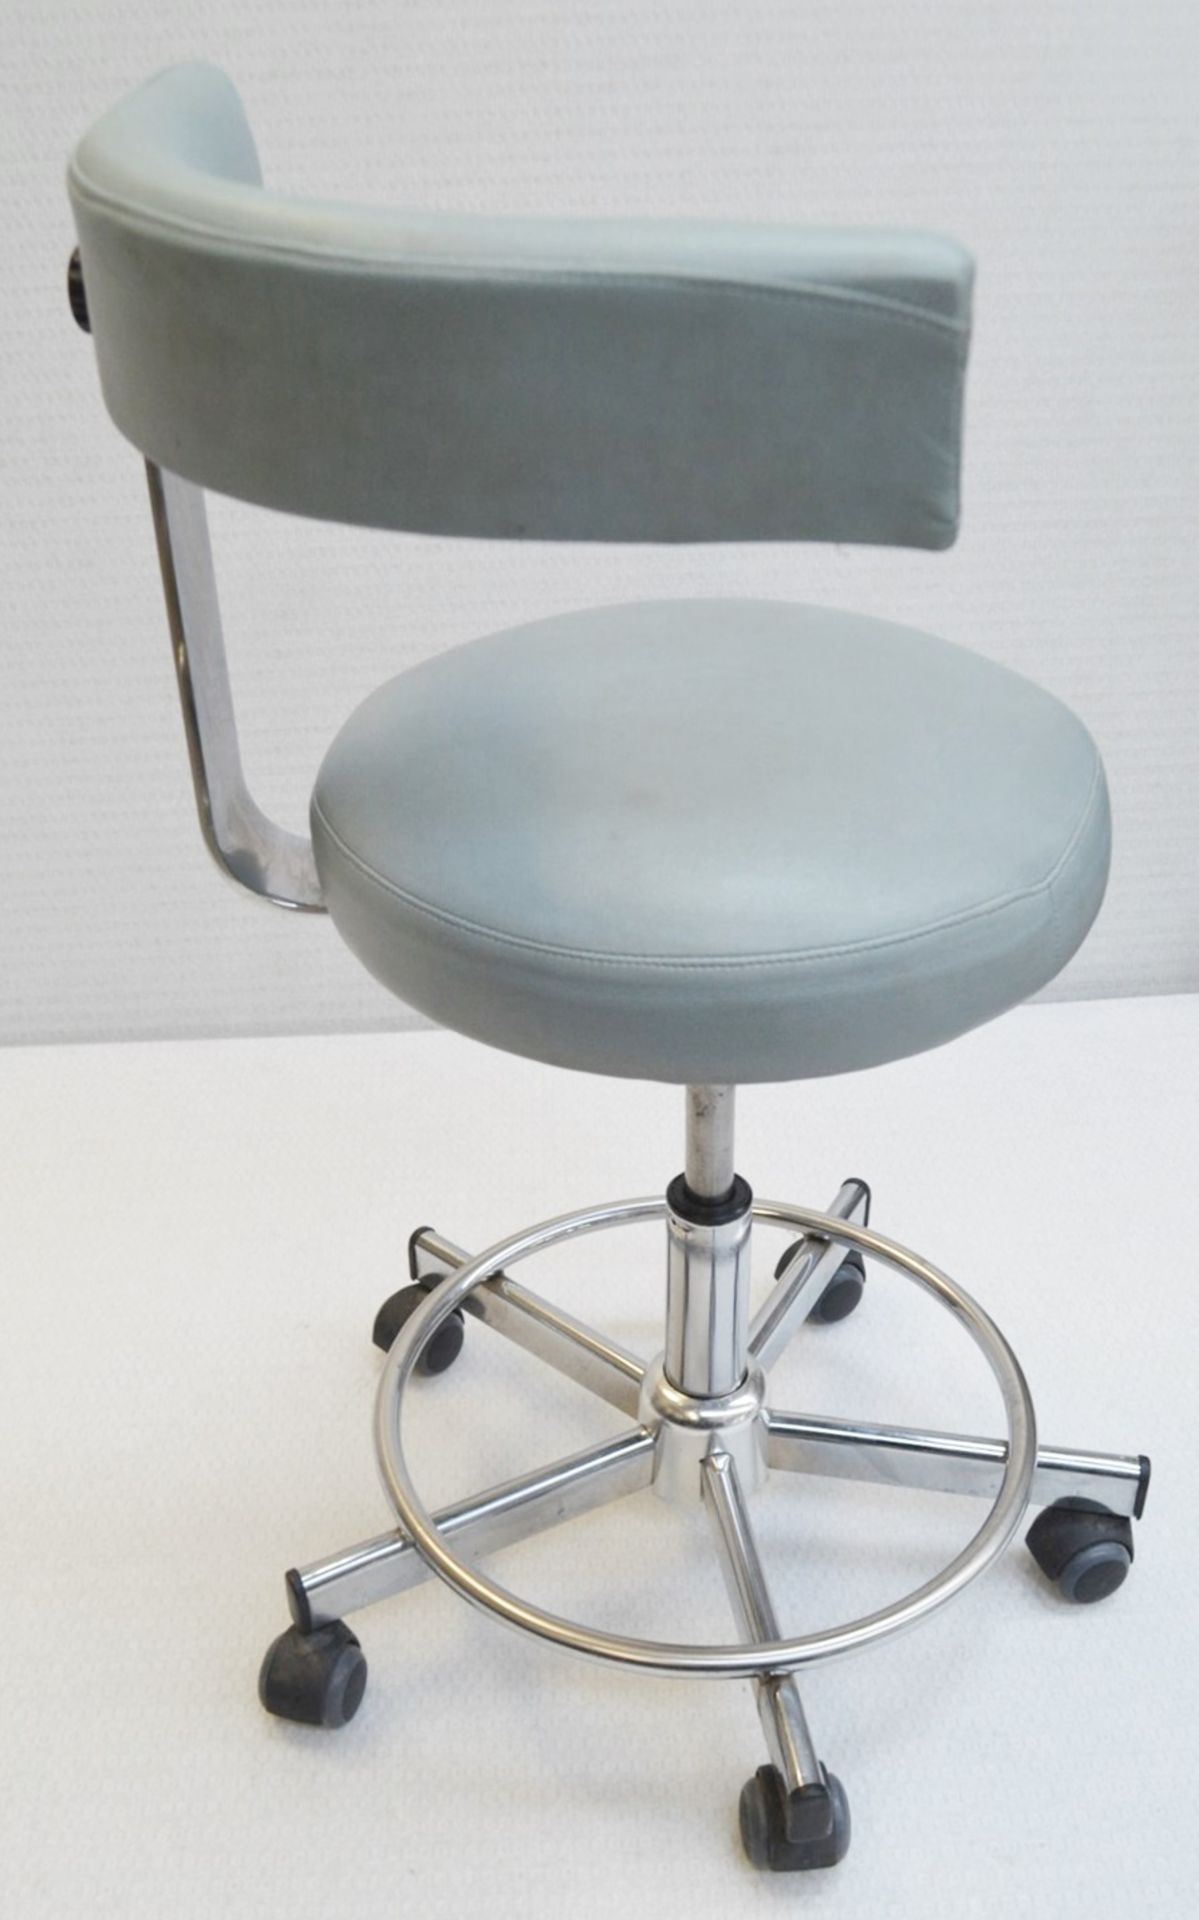 4 x Upholstered Gas Lift Treatment Stools - Dimensions: W47 x D49 x H72-85cm - Ref: MHB102 - CL670 - - Image 3 of 7